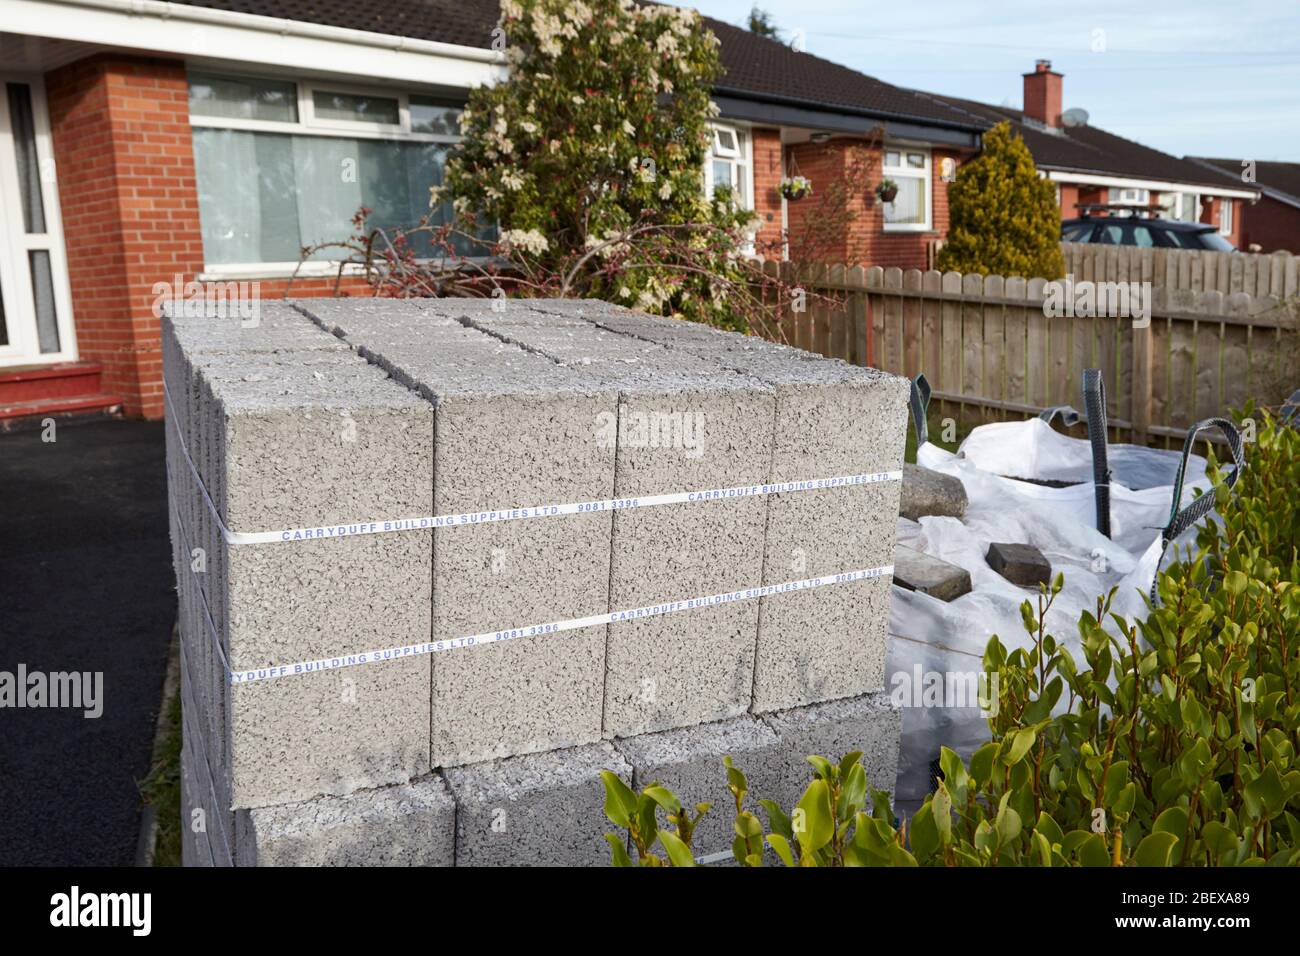 supply of building materials including concrete blocks sand and stones left in a garden of a house during covid lockdown Newtownabbey Northern Ireland Stock Photo